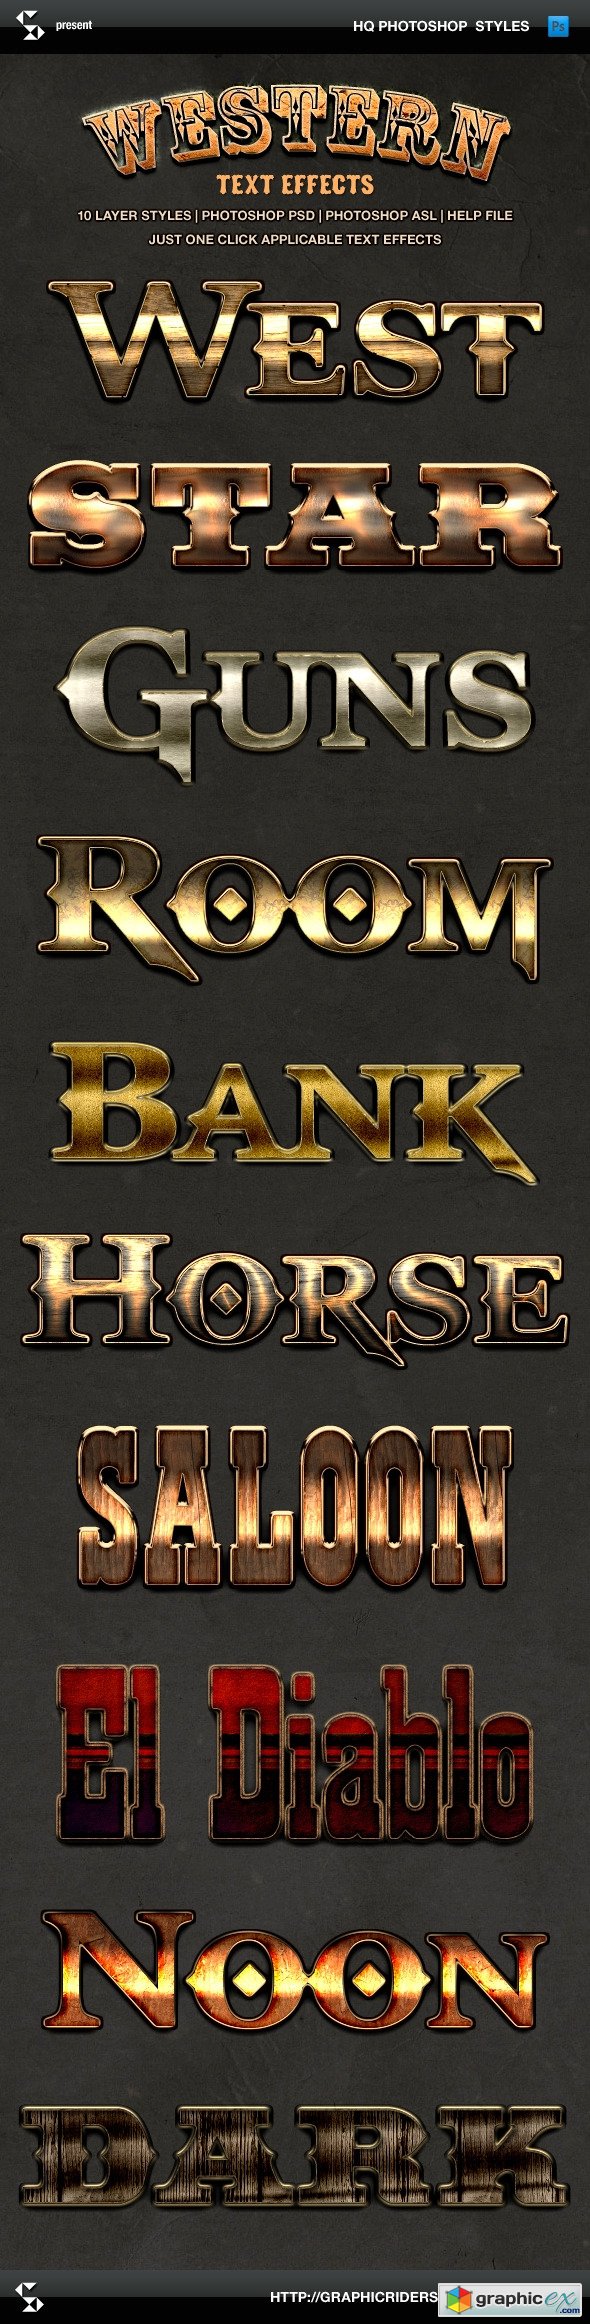 Wild West Style Text Effects - Western Styles